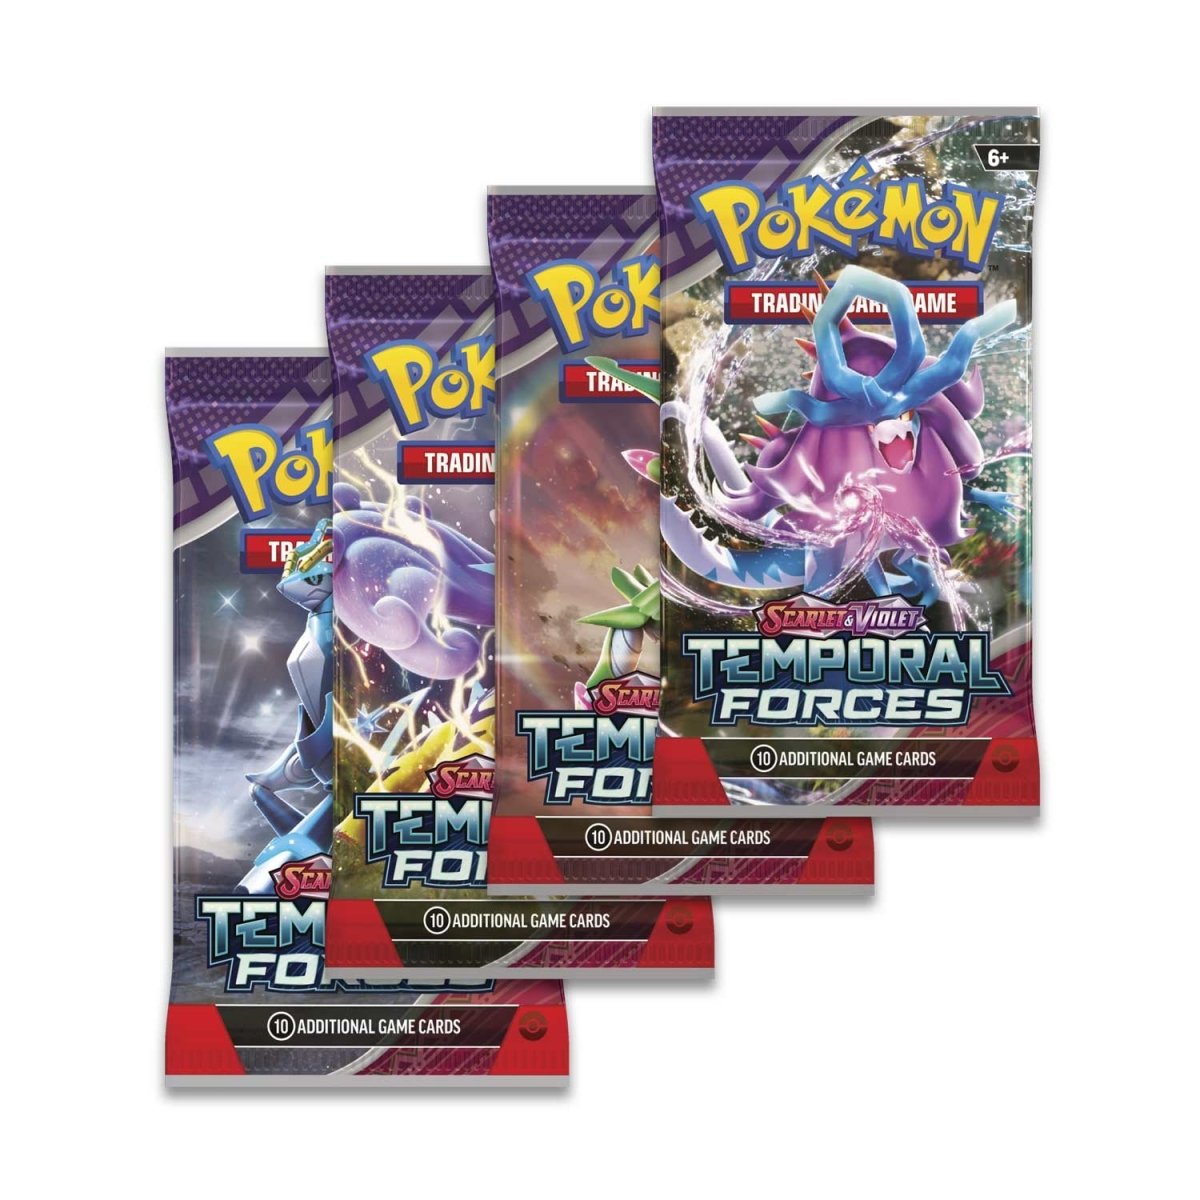 Pokémon Trading Card Game: Temporal Forces Booster Pack